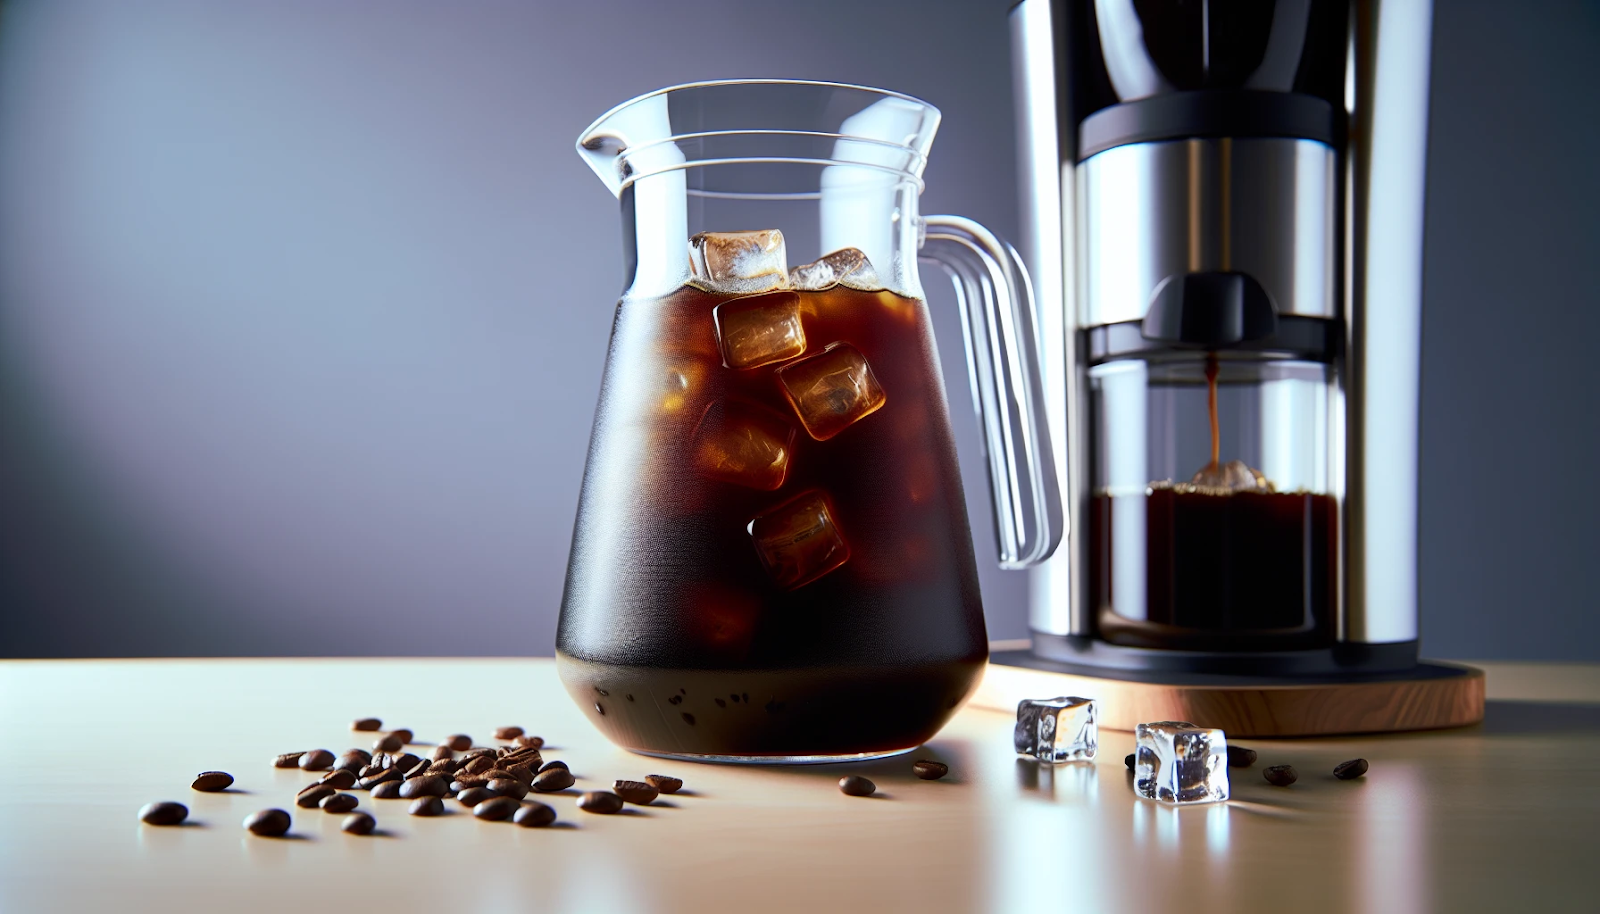 A glass pitcher filled with cold brew coffee and ice, symbolizing the lengthy process of cold brew coffee preparation